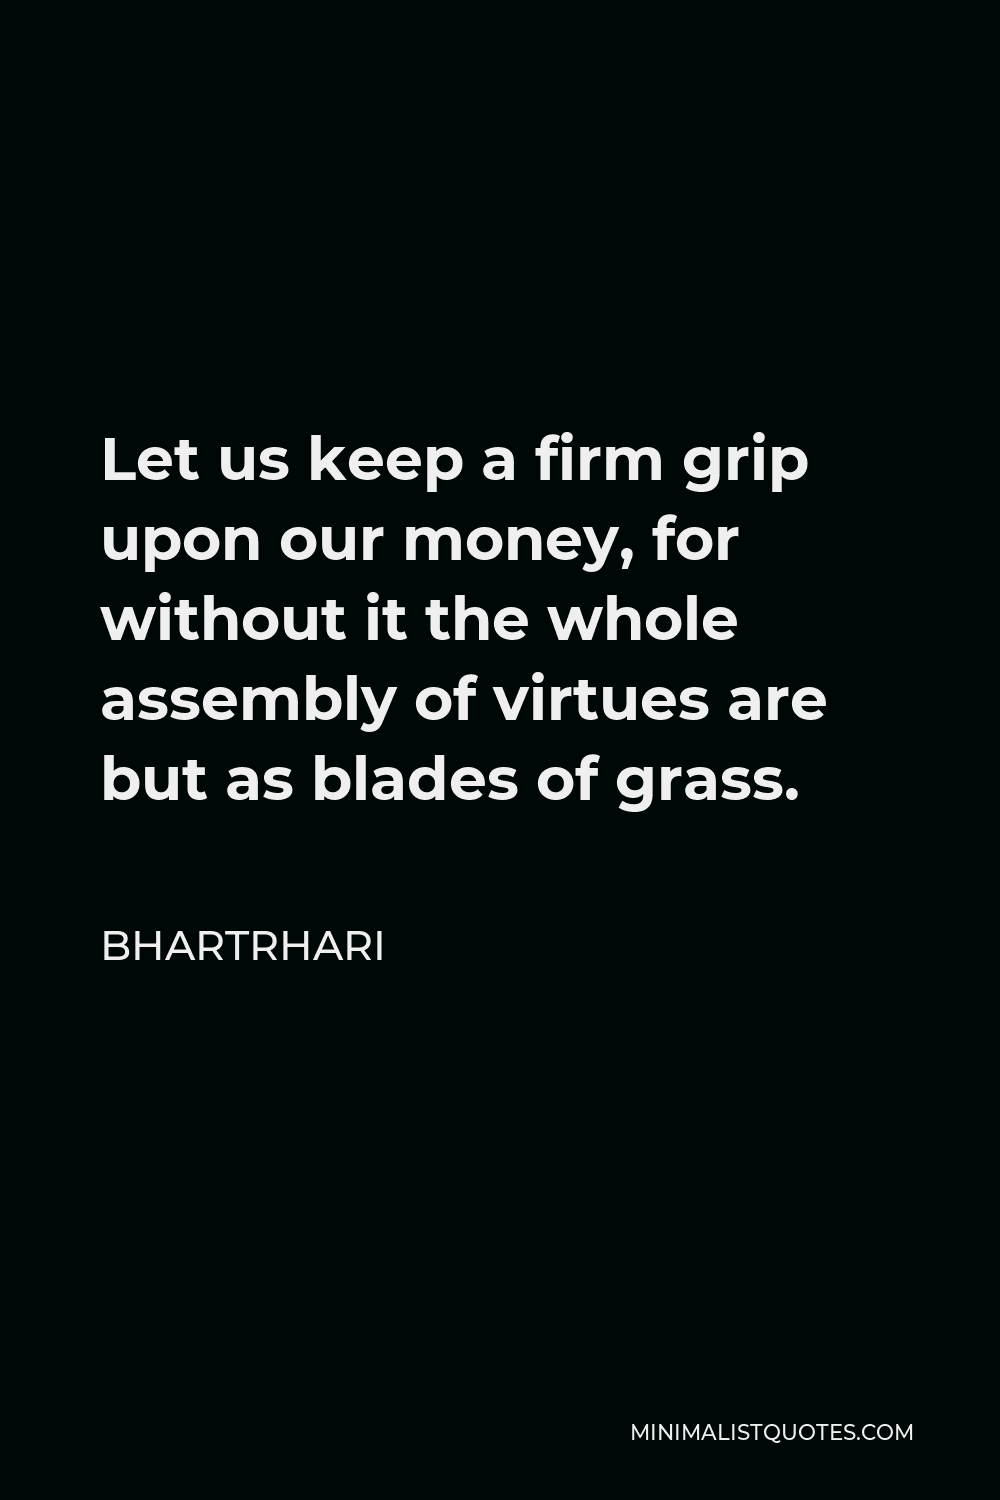 Bhartrhari Quote - Let us keep a firm grip upon our money, for without it the whole assembly of virtues are but as blades of grass.